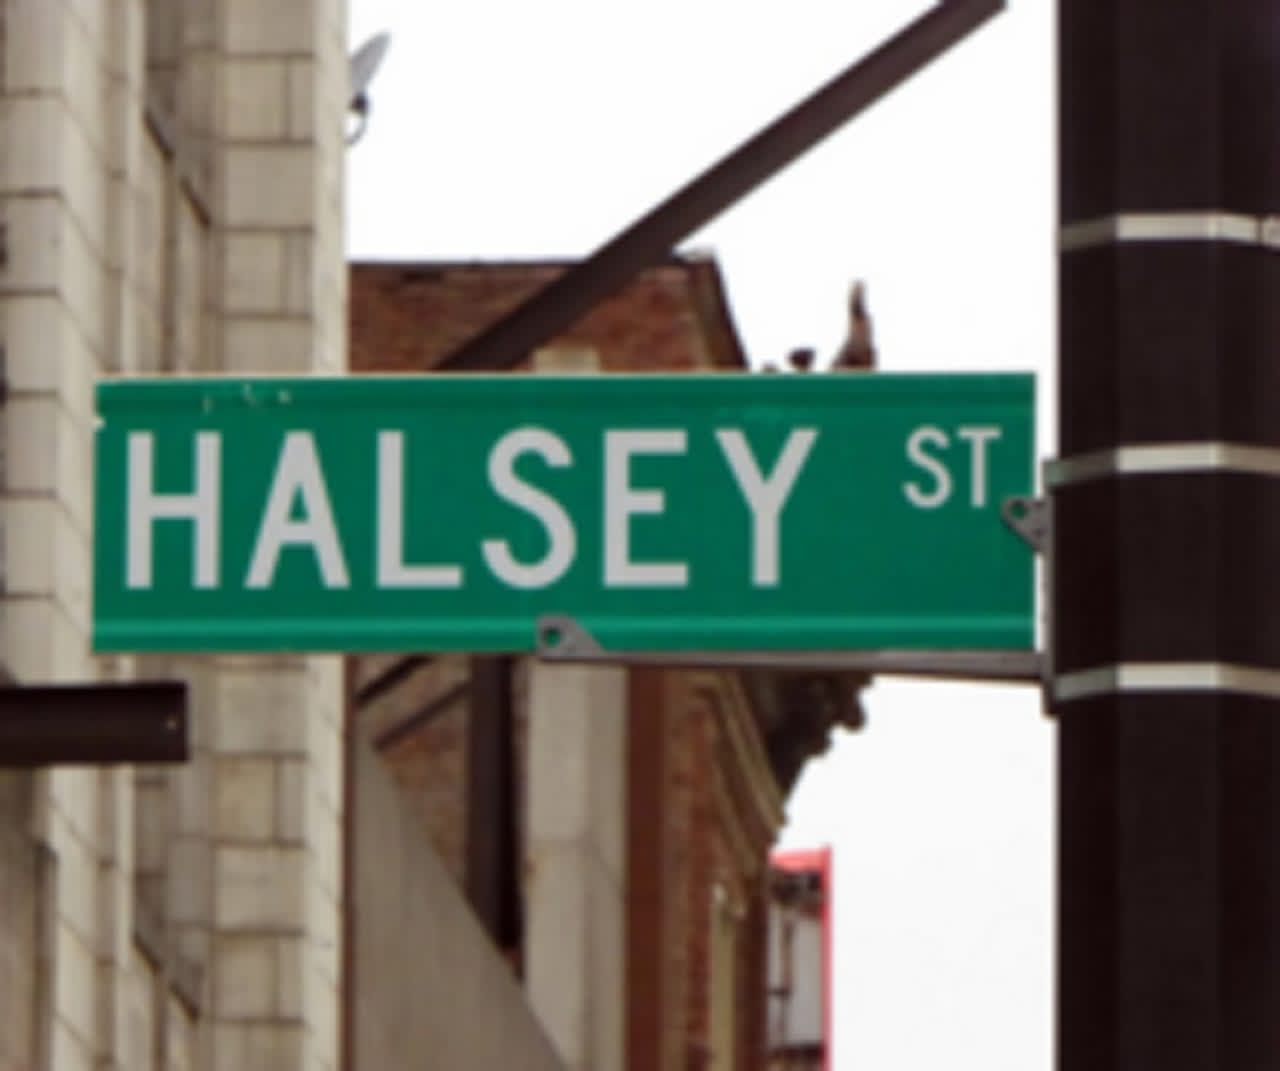 Streets will be closed for the Halsey Street Festival, which was rescheduled.